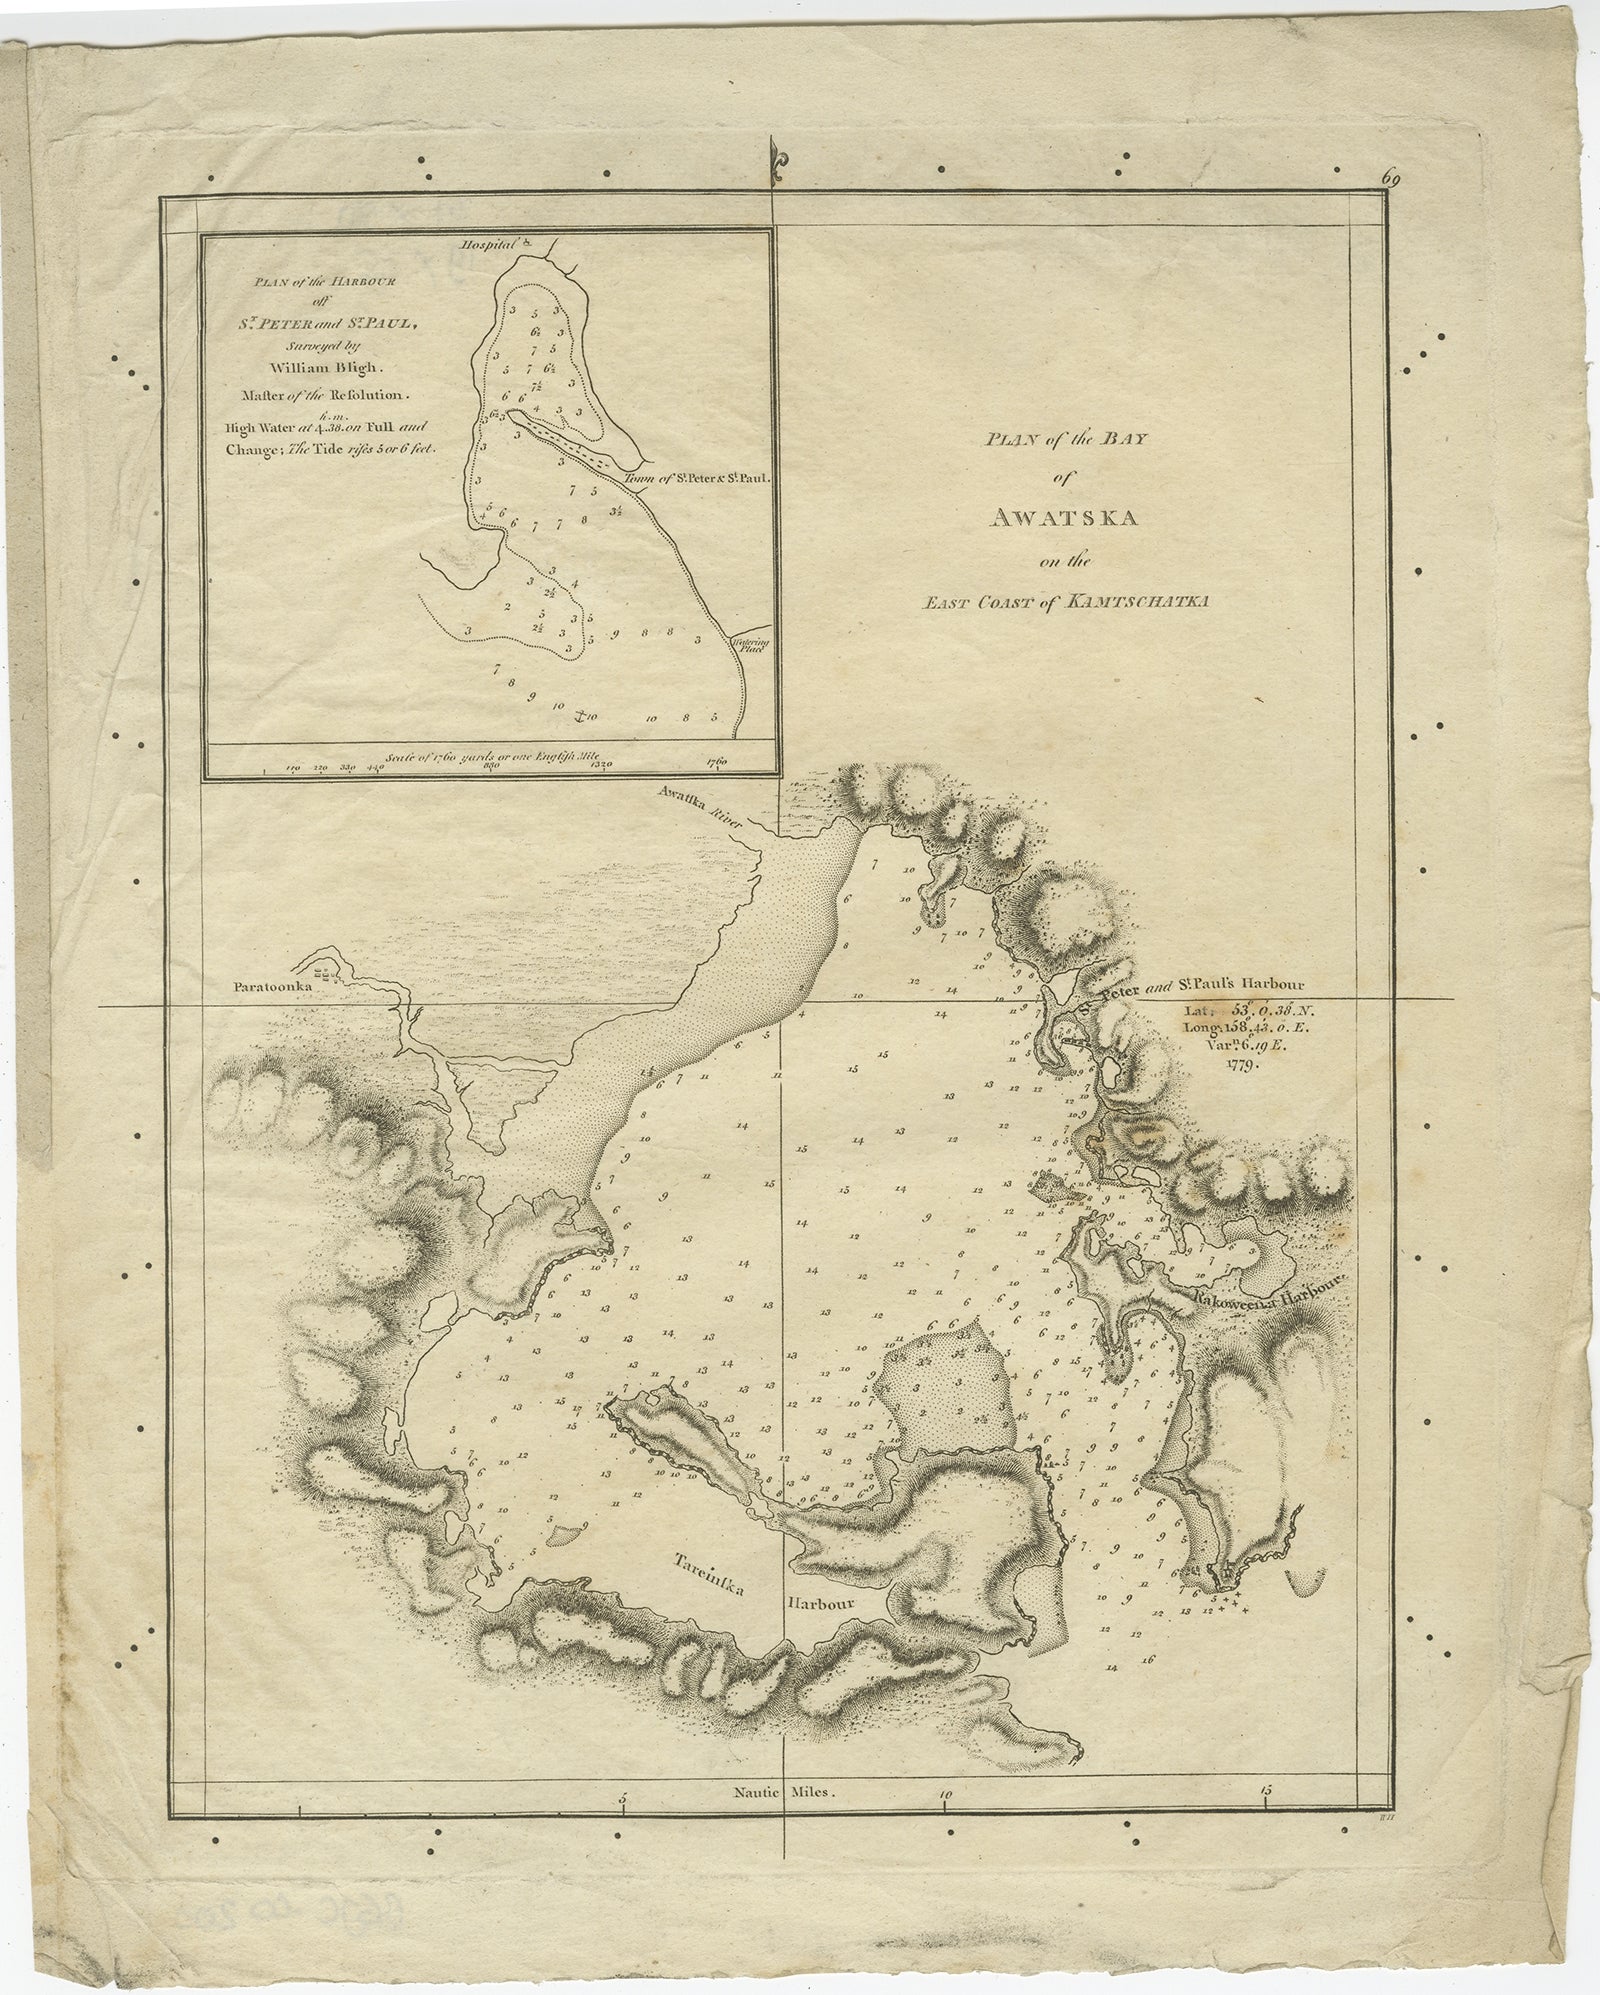 Antique map Awatska titled 'Plan of the Bay of Awatska (..)'. Antique map of Awatska Bay on the east coast of the Russian peninsula of Kamtschatka. Inset plan of St. Peter’s and St. Paul’s Harbour. Originates from an edition of Cook's